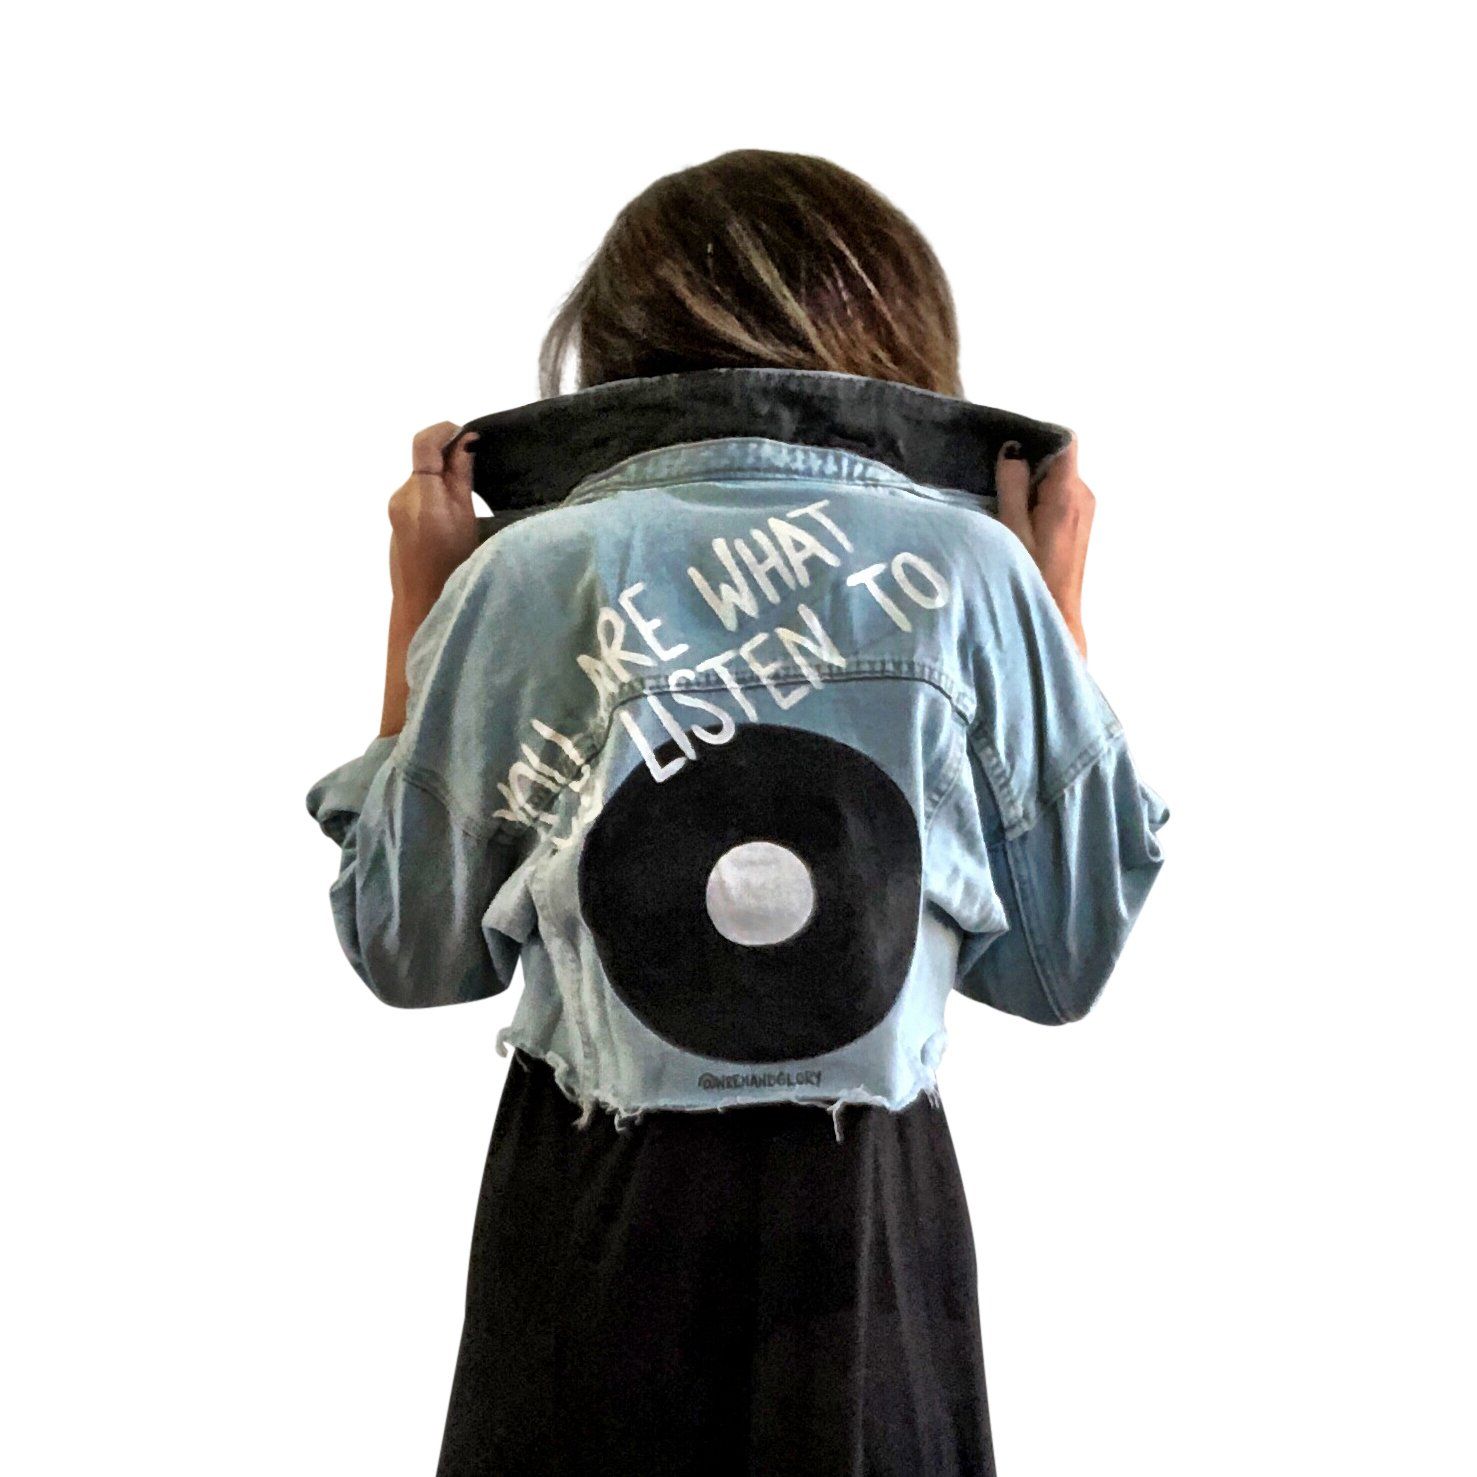 'WITH THE BAND, PART 2' DENIM JACKET